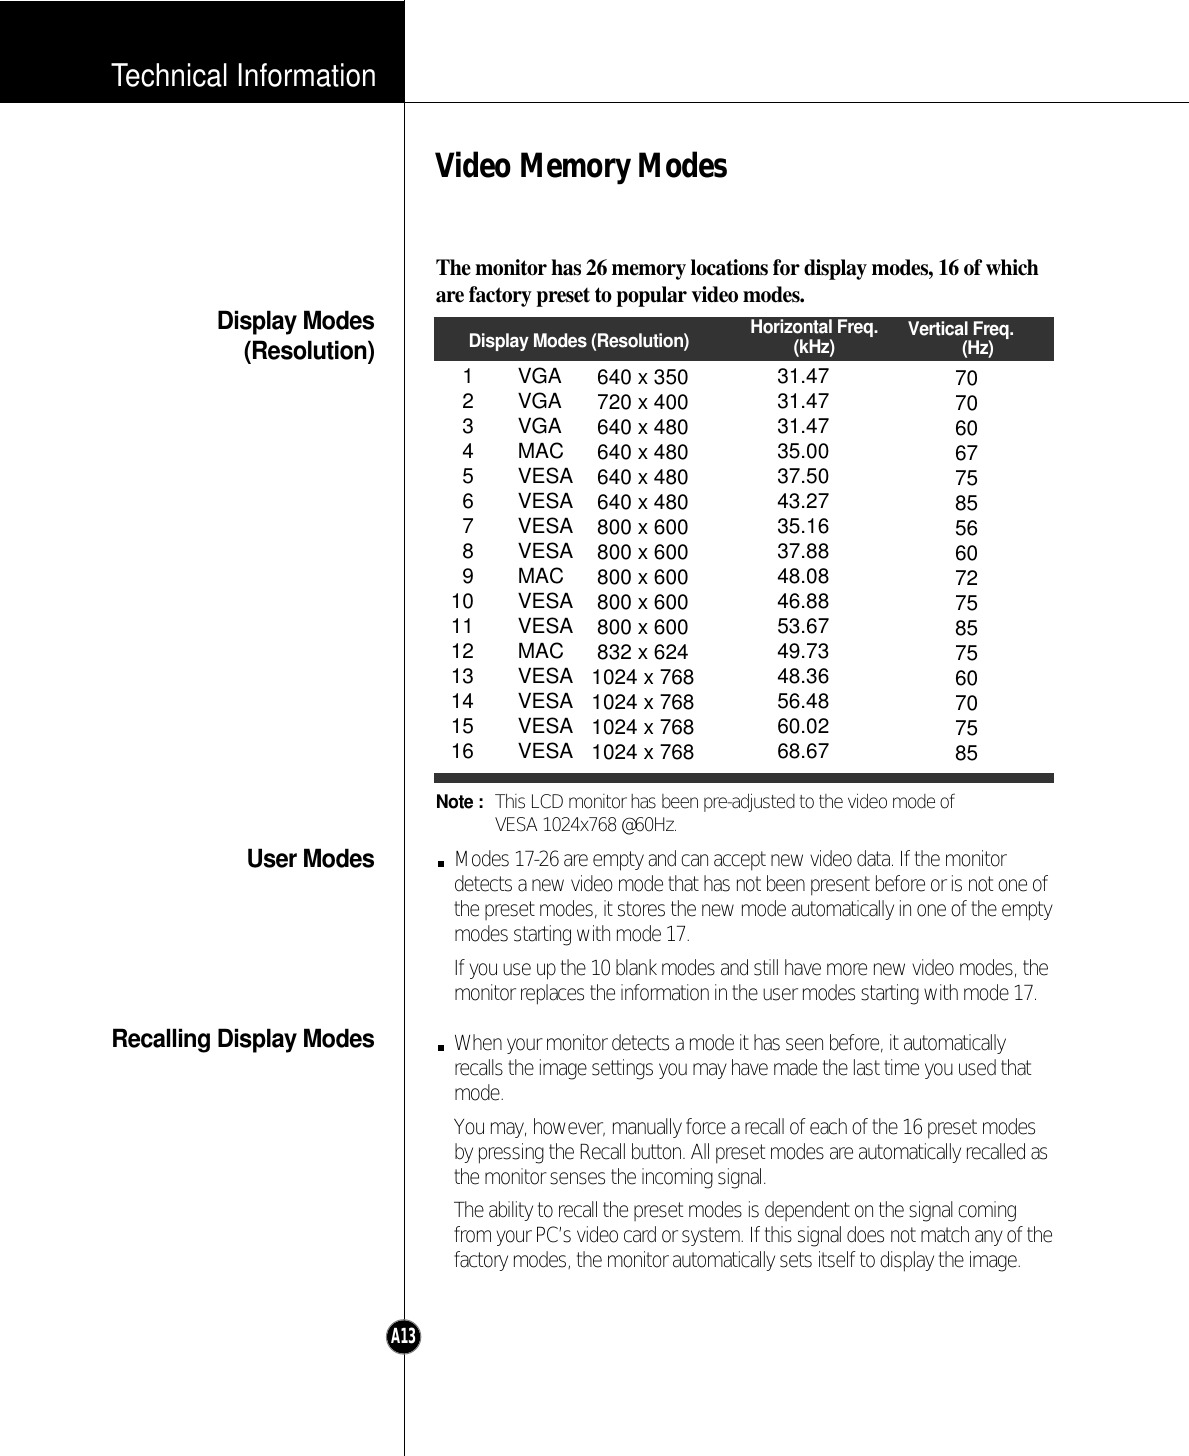 Technical InformationA13Display Modes(Resolution)User ModesRecalling Display ModesVideo Memory ModesThe monitor has 26 memory locations for display modes, 16 of whichare factory preset to popular video modes.Modes 17-26 are empty and can accept new video data. If the monitordetects a new video mode that has not been present before or is not one ofthe preset modes, it stores the new mode automatically in one of the emptymodes starting with mode 17.If you use up the 10 blank modes and still have more new video modes, themonitor replaces the information in the user modes starting with mode 17.When your monitor detects a mode it has seen before, it automaticallyrecalls the image settings you may have made the last time you used thatmode.You may, however, manually force a recall of each of the 16 preset modesby pressing the Recall button. All preset modes are automatically recalled asthe monitor senses the incoming signal.The ability to recall the preset modes is dependent on the signal comingfrom your PC’s video card or system. If this signal does not match any of thefactory modes, the monitor automatically sets itself to display the image.12345678910111213141516640 x 350720 x 400640 x 480640 x 480640 x 480640 x 480800 x 600800 x 600800 x 600800 x 600800 x 600832 x 6241024 x 7681024 x 7681024 x 7681024 x 76831.4731.4731.4735.0037.5043.2735.1637.8848.0846.8853.6749.7348.3656.4860.0268.6770706067758556607275857560707585Display Modes (Resolution) Horizontal Freq.(kHz) Vertical Freq.(Hz)VGAVGAVGAMACVESAVESAVESAVESAMACVESAVESAMACVESAVESAVESAVESANote : This LCD monitor has been pre-adjusted to the video mode of VESA 1024x768 @60Hz.